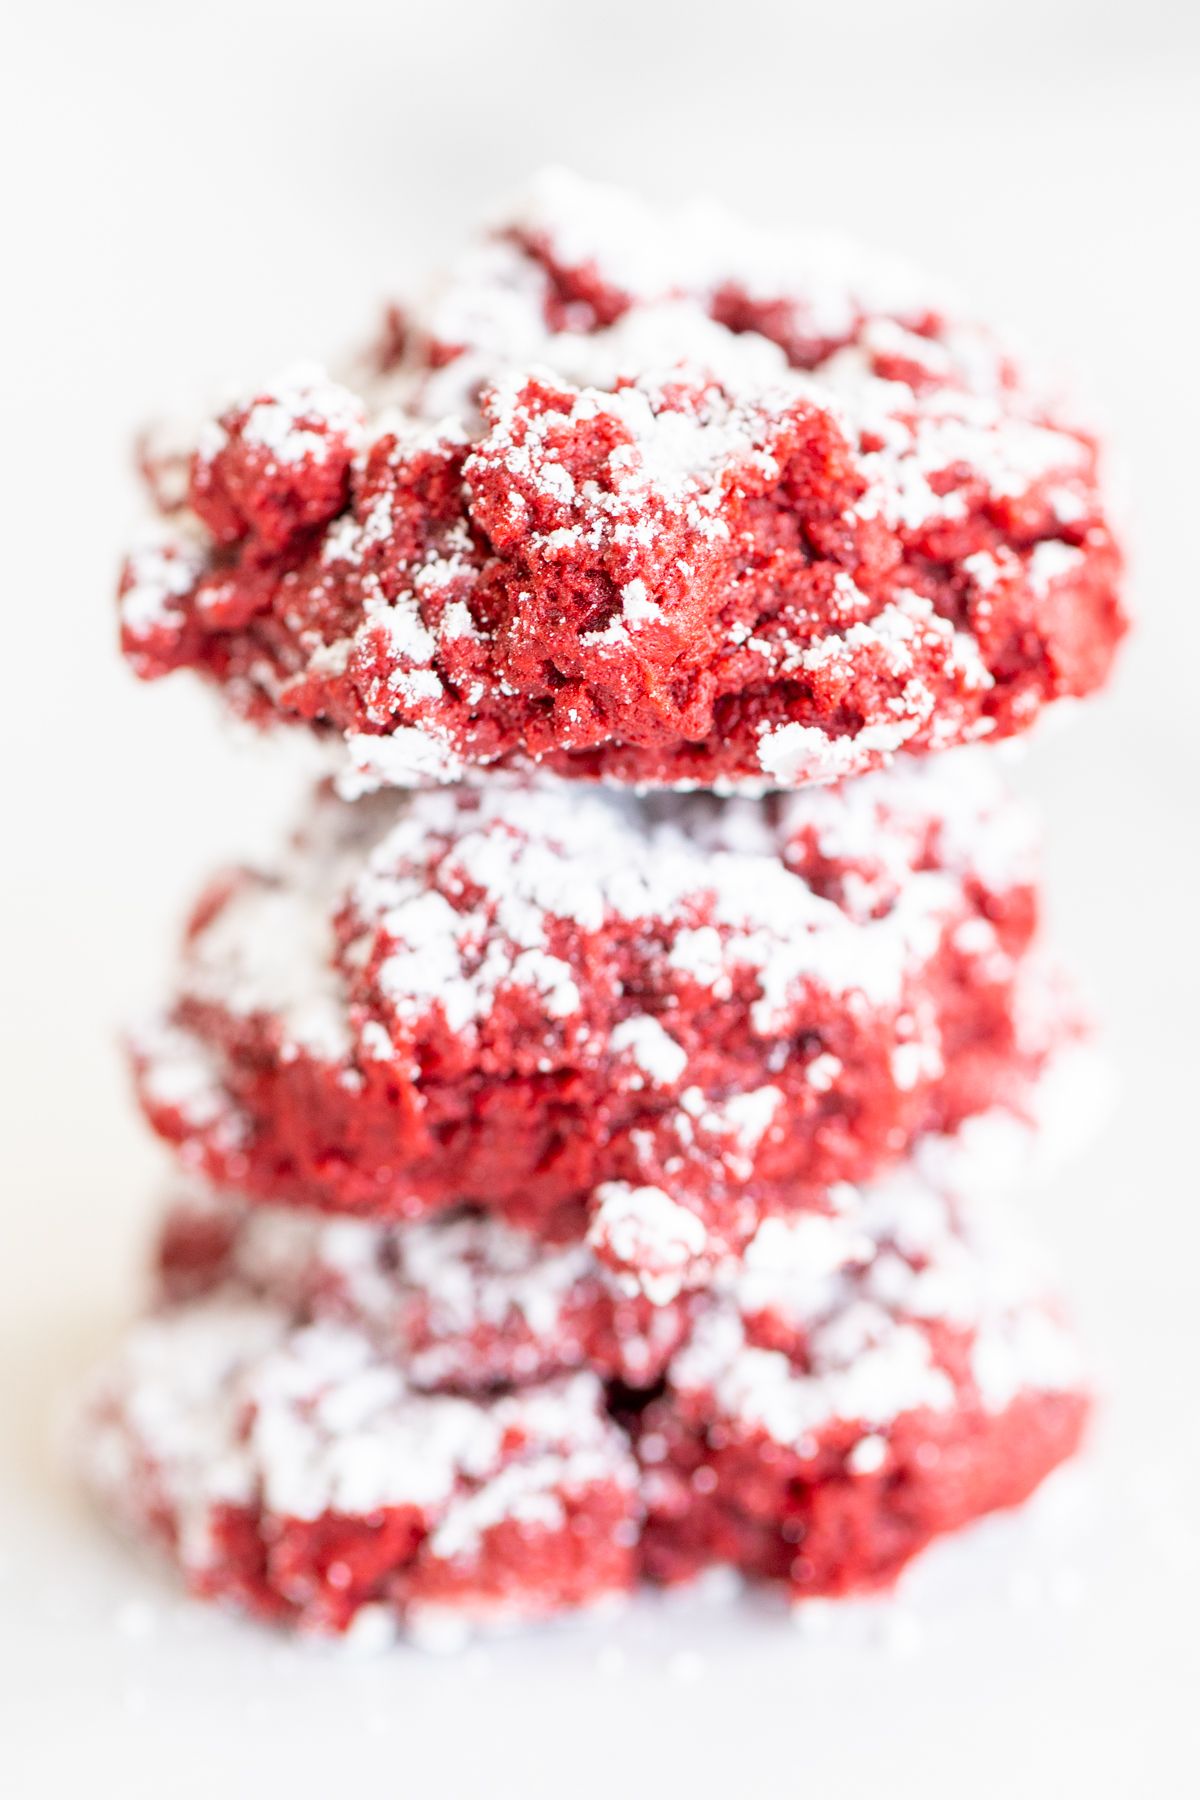 A stack of red velvet gooey butter cookies on a white surface.